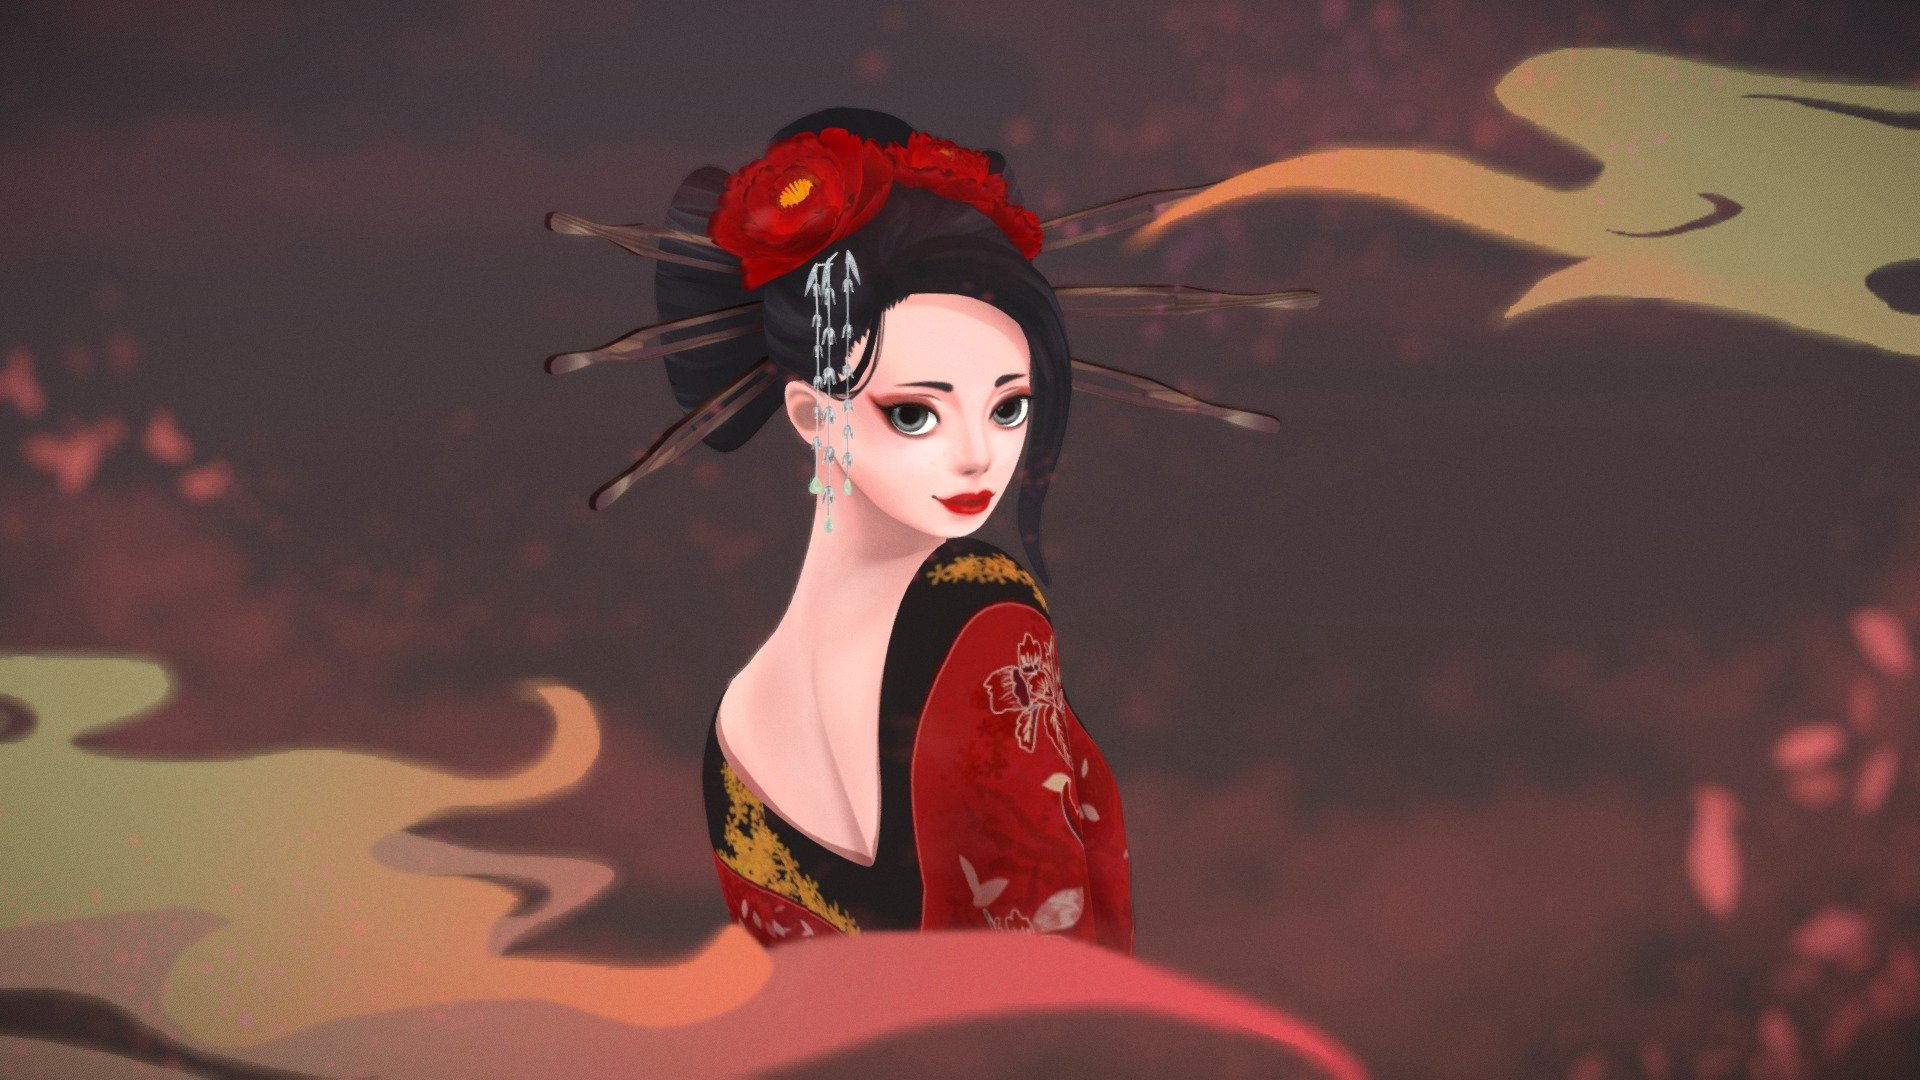 This bust is made for Yekatrina Bourkina’s 3D Bust Challenge:3!
She is inspired by Geisha(芸者), Japanese women who entertain through performing the traditional art and dance etc. 
Was fun working on this project! Learnt a bit more about handpainted texturing and also the Yoshiwara culture 3d model